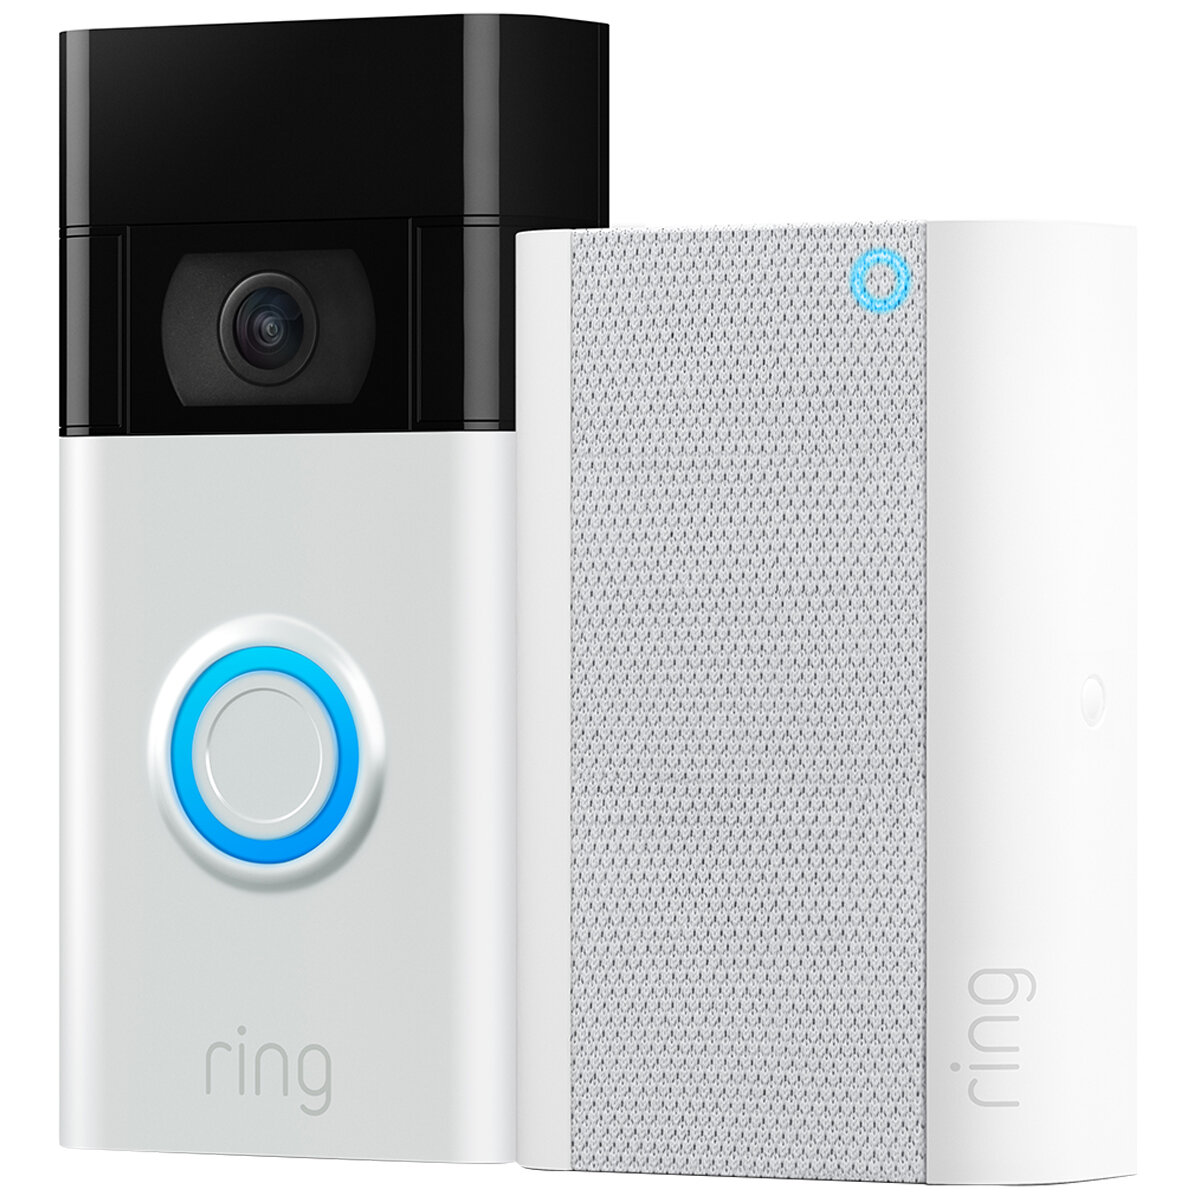 How to Install & Setup Ring Chime Pro (Simple), DiY